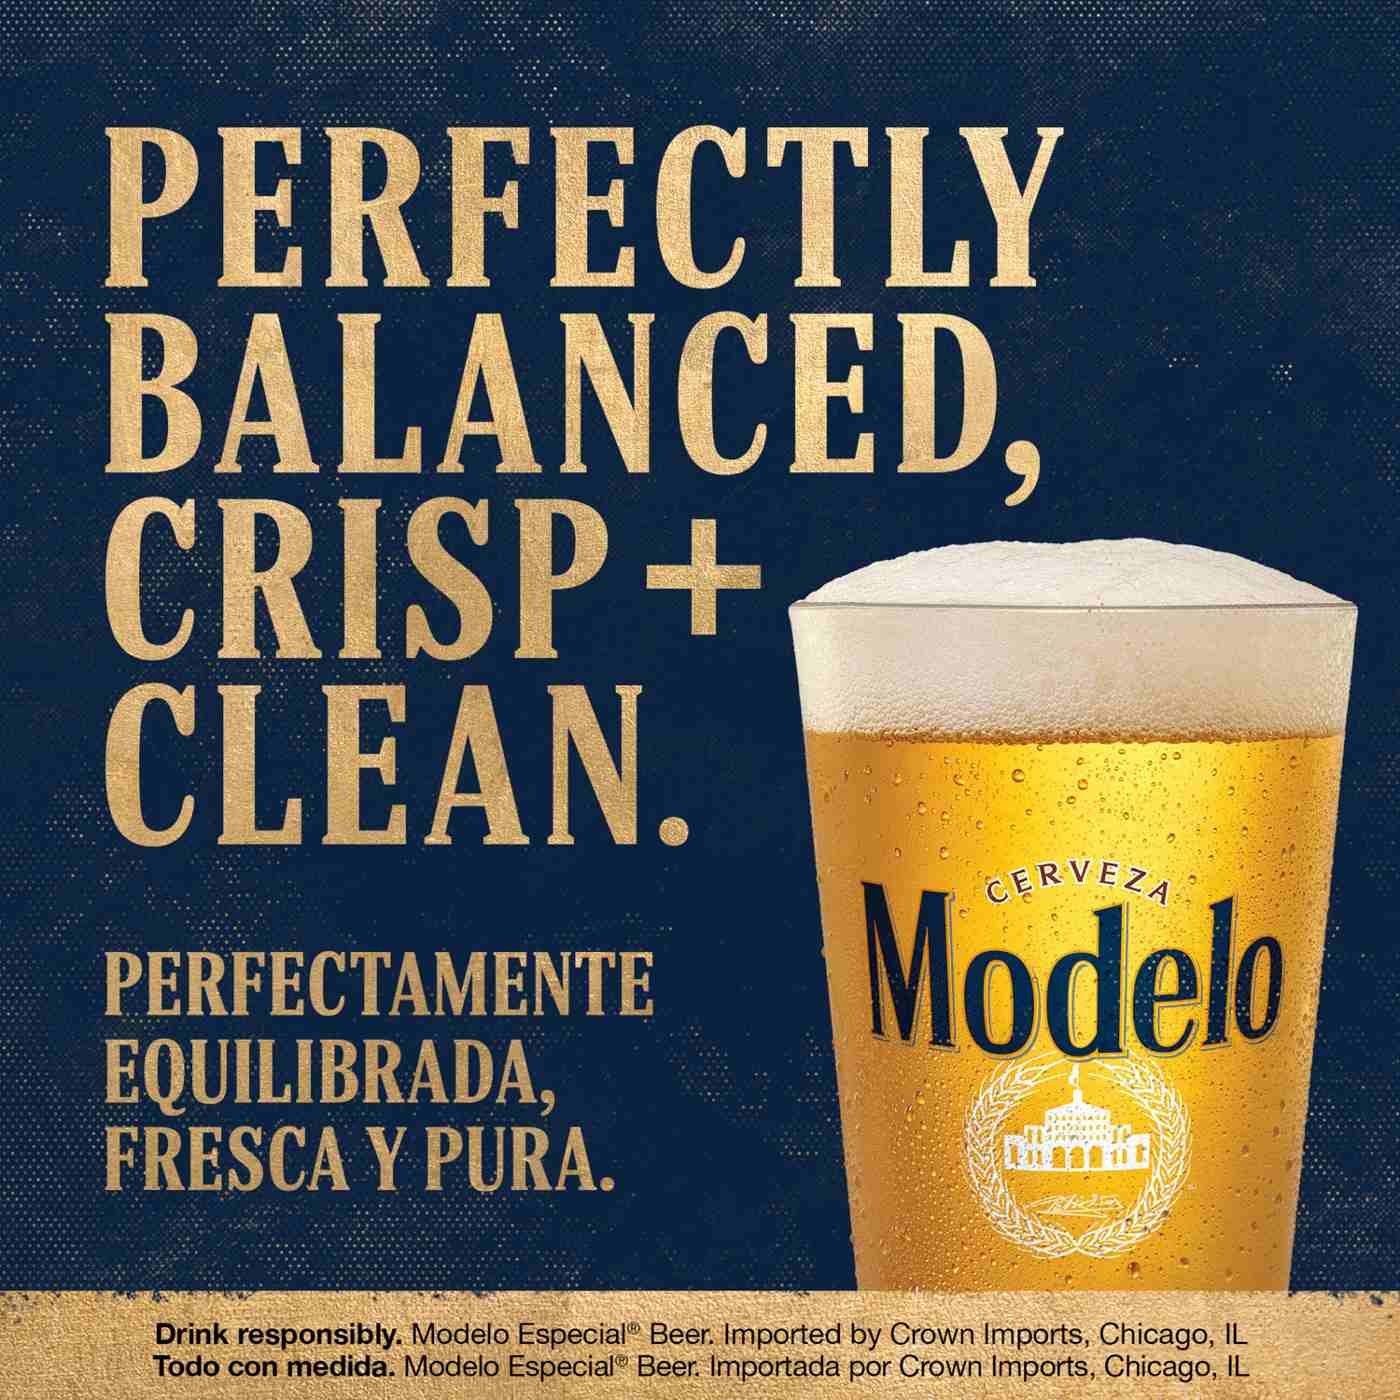 Modelo Especial Mexican Lager Import Beer 24 oz Cans, 3 pk; image 9 of 10